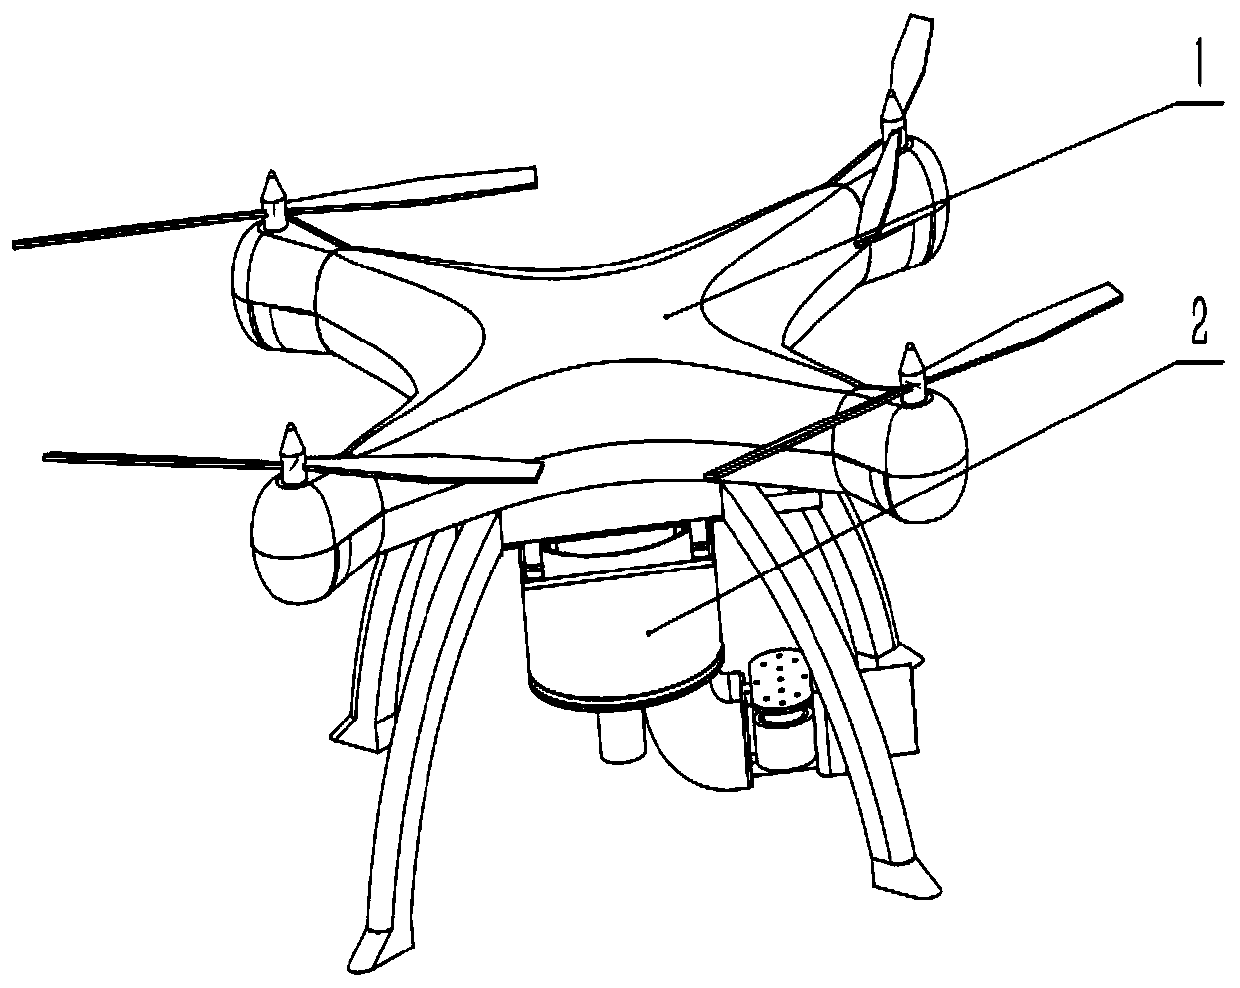 Agricultural unmanned aerial vehicle mounted biological control material delivery device and method